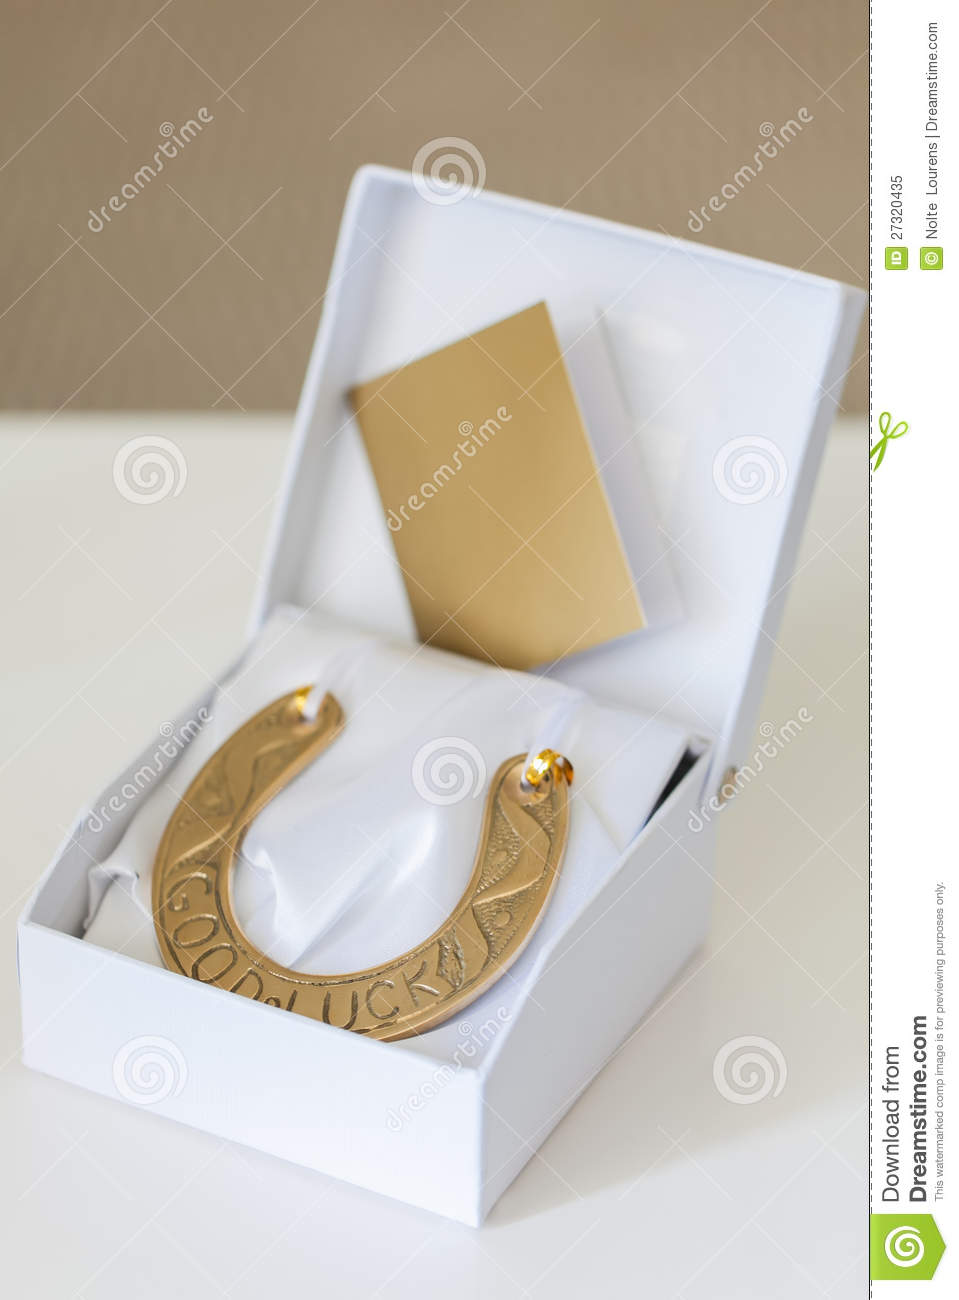 Good Luck Charm Royalty Free Stock Photo   Image  27320435